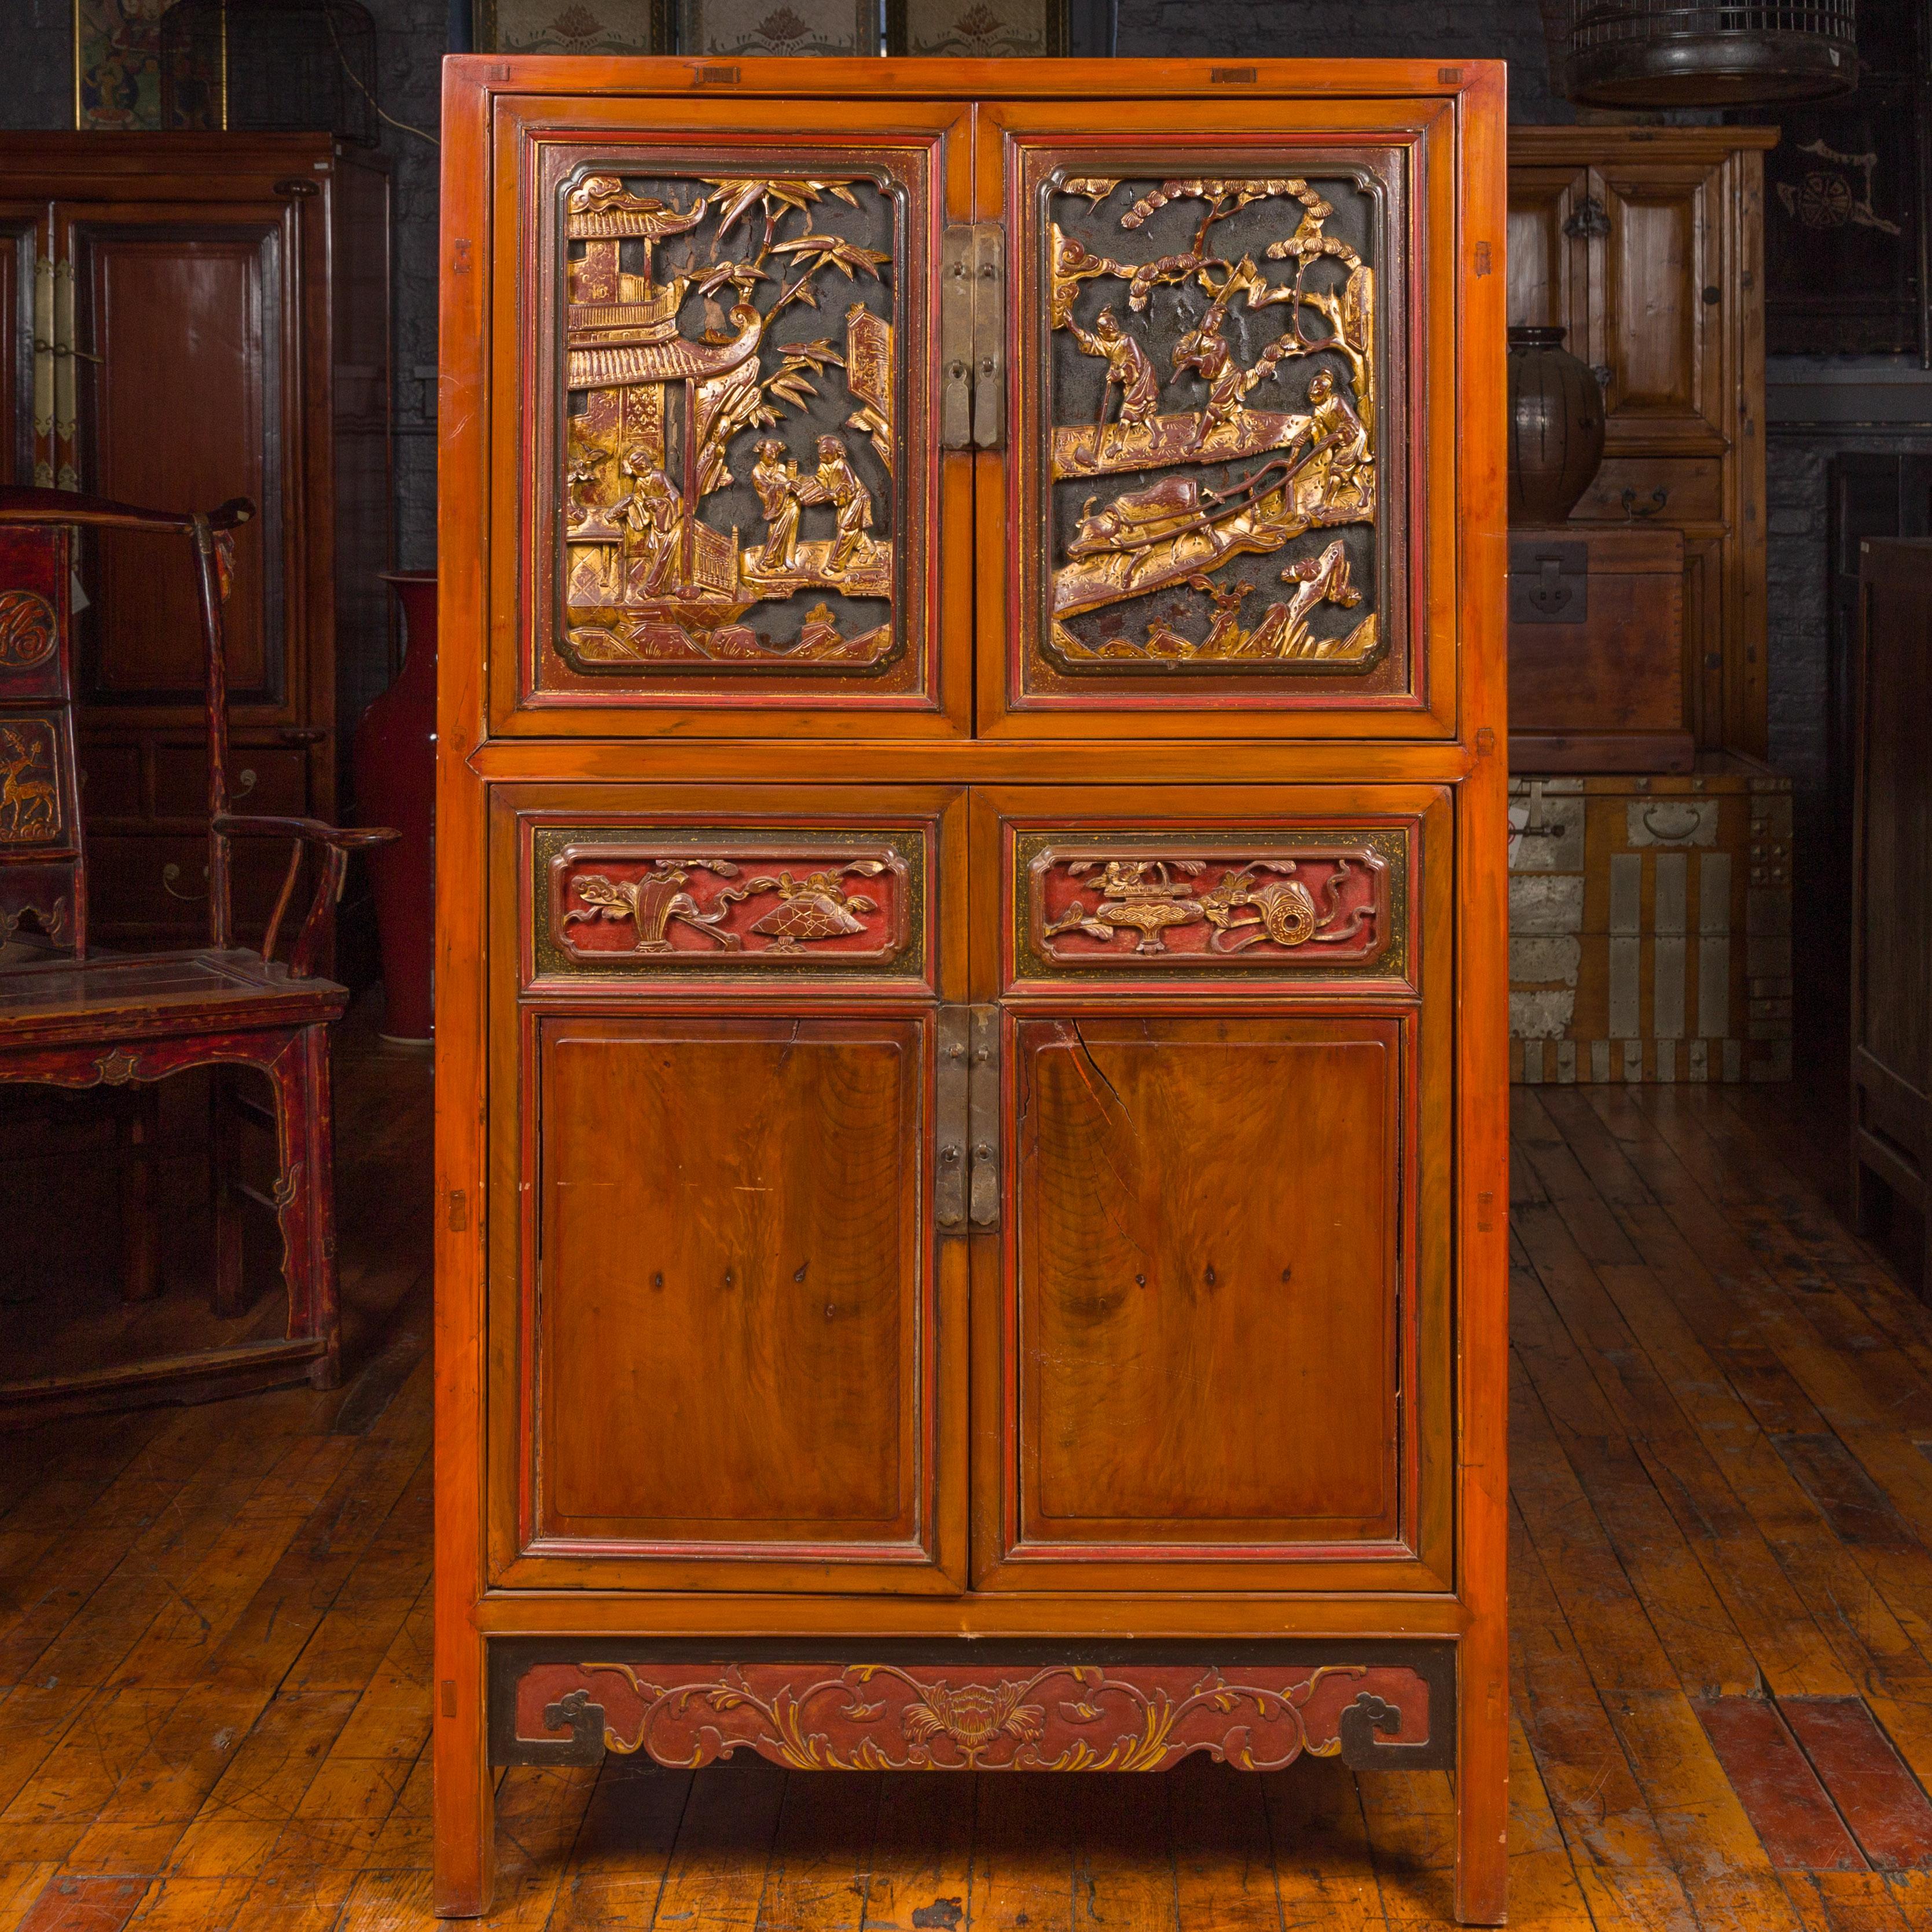 An antique Chinese Ming dynasty style cabinet from the 19th century, with two pairs of double doors, two drawers, carved giltwood motifs and red accents. Born in China during the 19th century, this wooden cabinet captures our attention with its